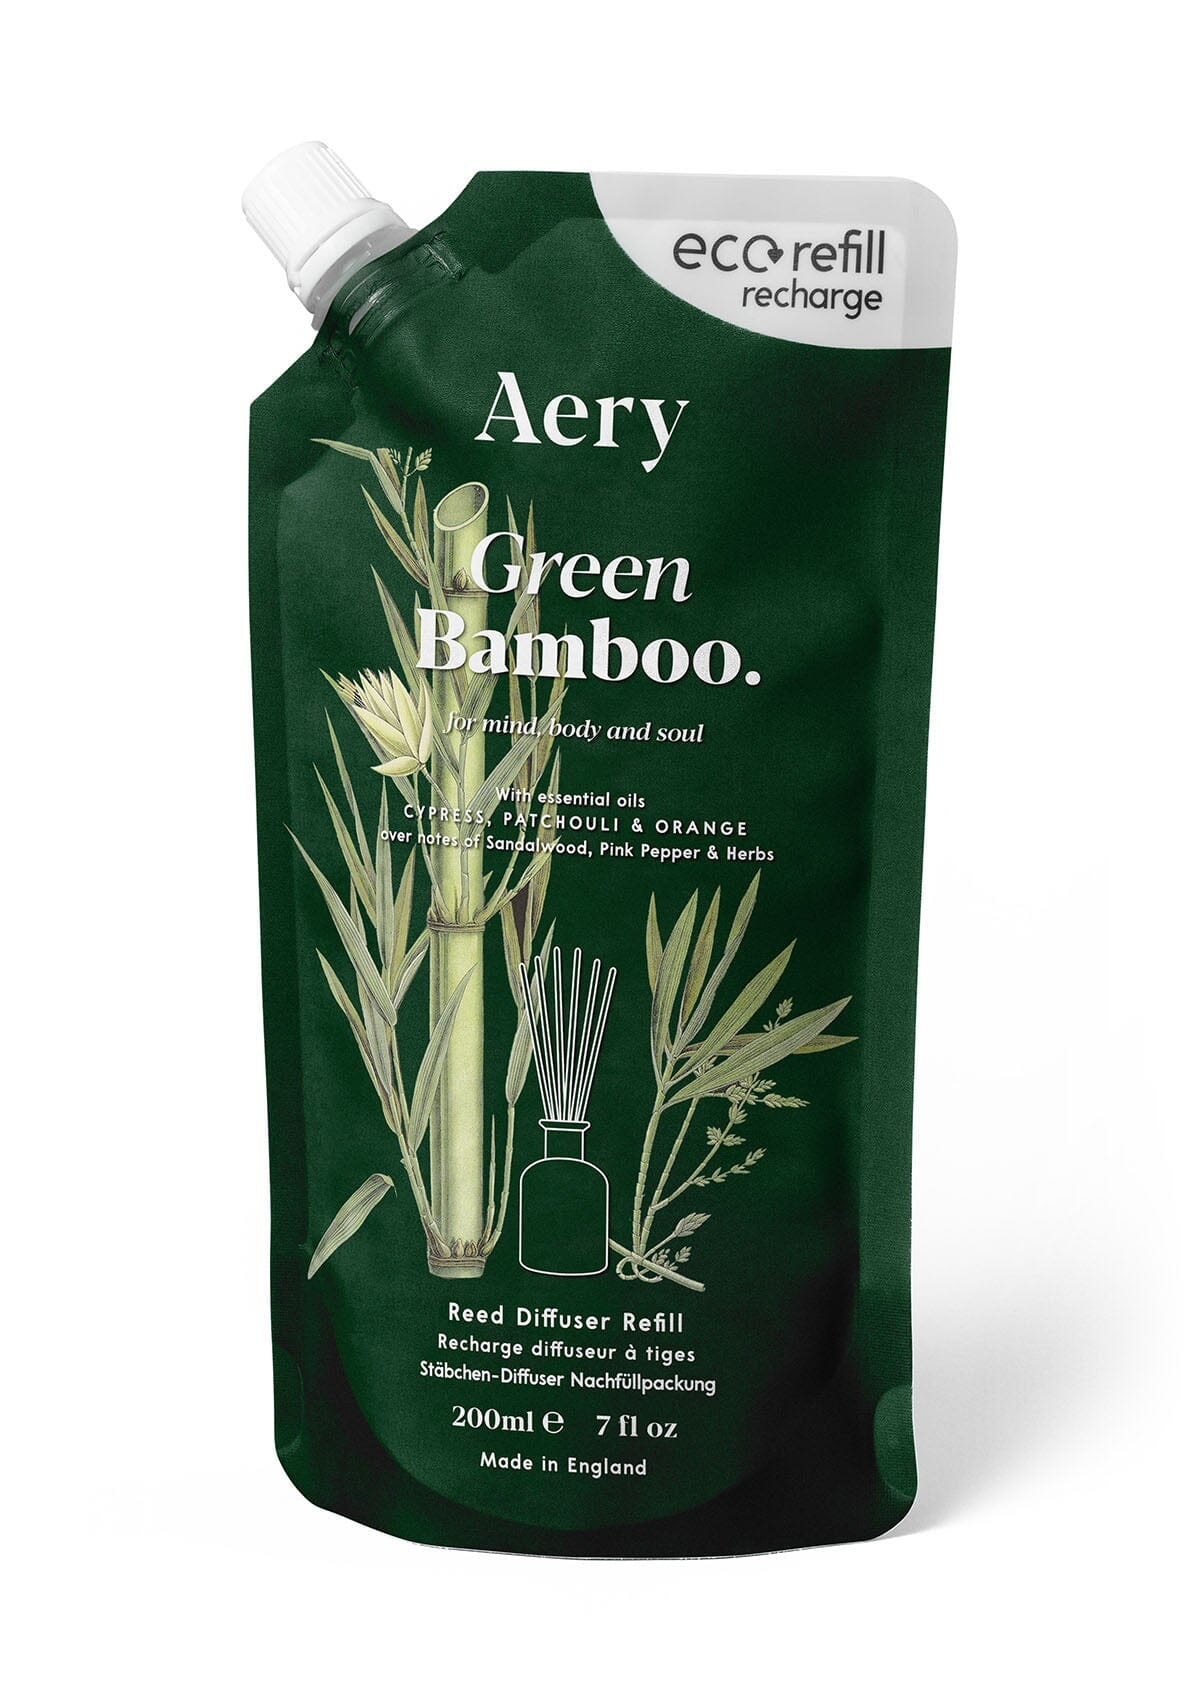 Green Bamboo reed diffuser refill pouch by aery displayed on white background 